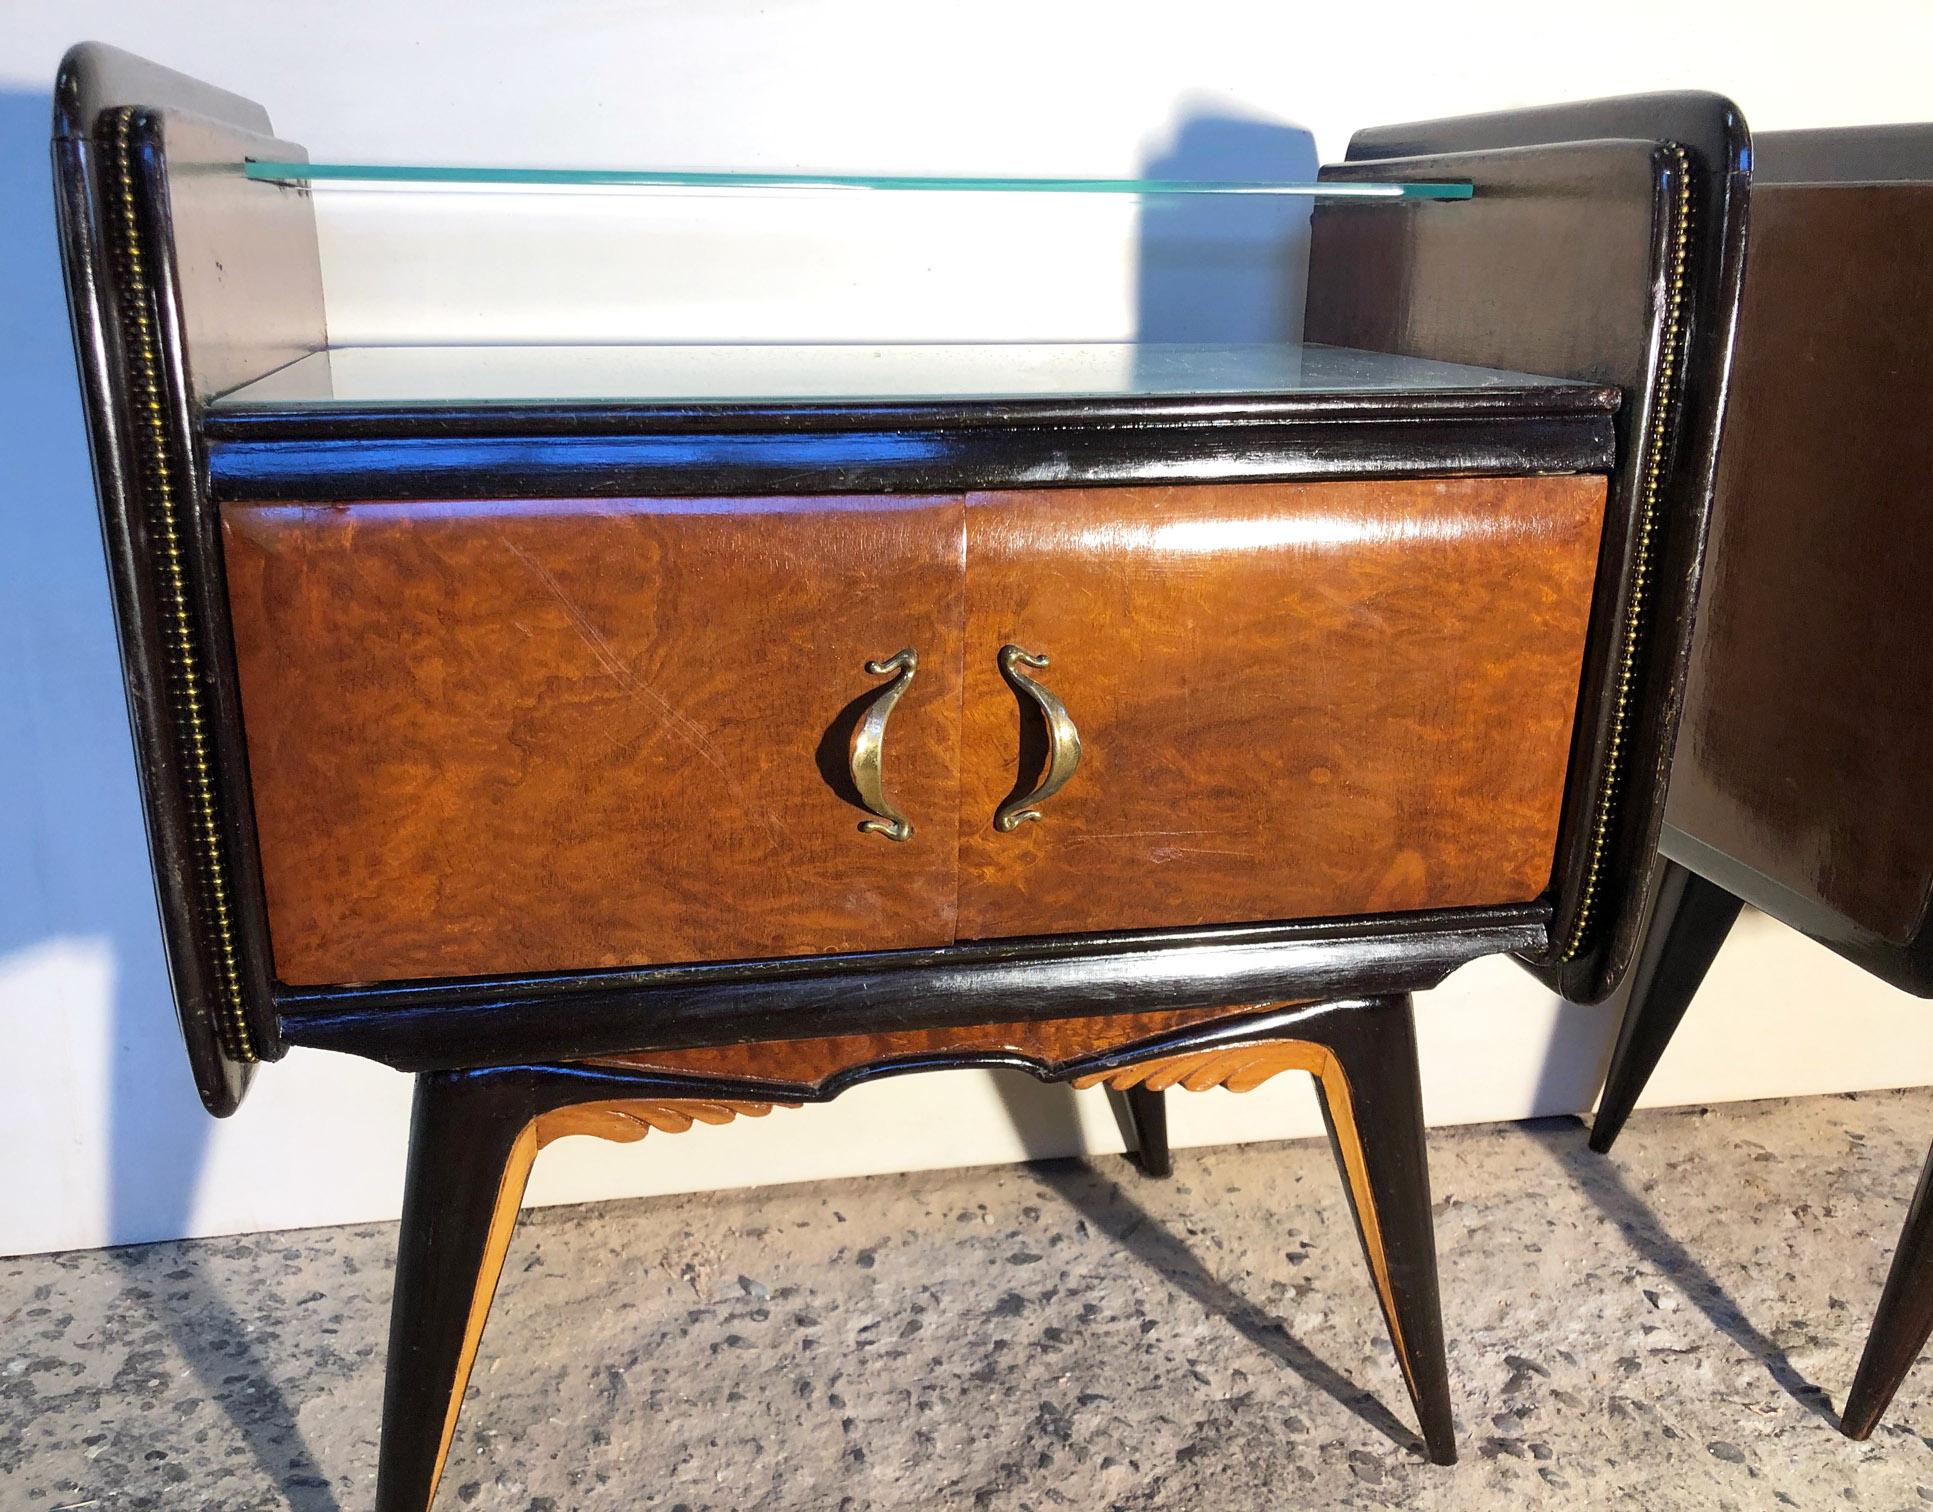 Pair of original Italian design nightstands from 1950 with backsplash, marbled glass and ebonized wood.
Given the weight and size, it will be delivered in a specific wooden case for export, packed in bubble wrap.
Comes from an old country house in